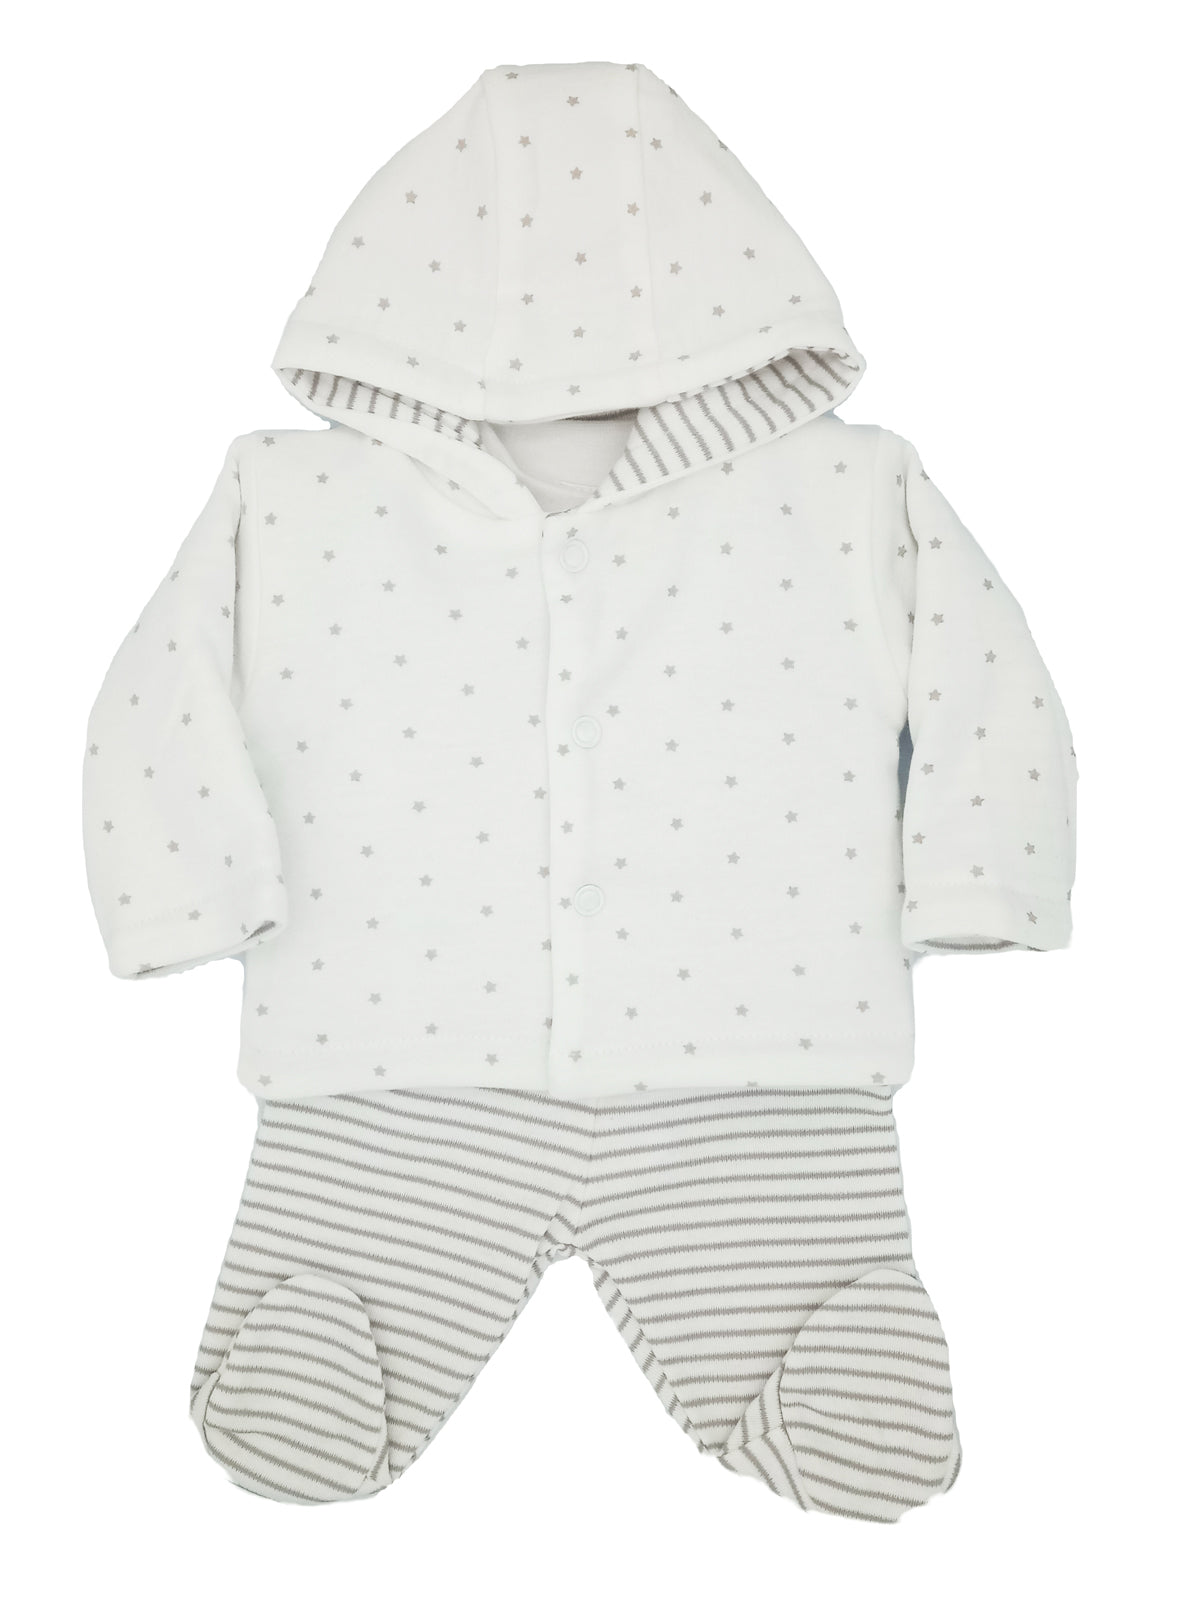 Welcome to the World 3 Piece Gift Set: Trousers, Top & Jacket - Set - Just too Cute